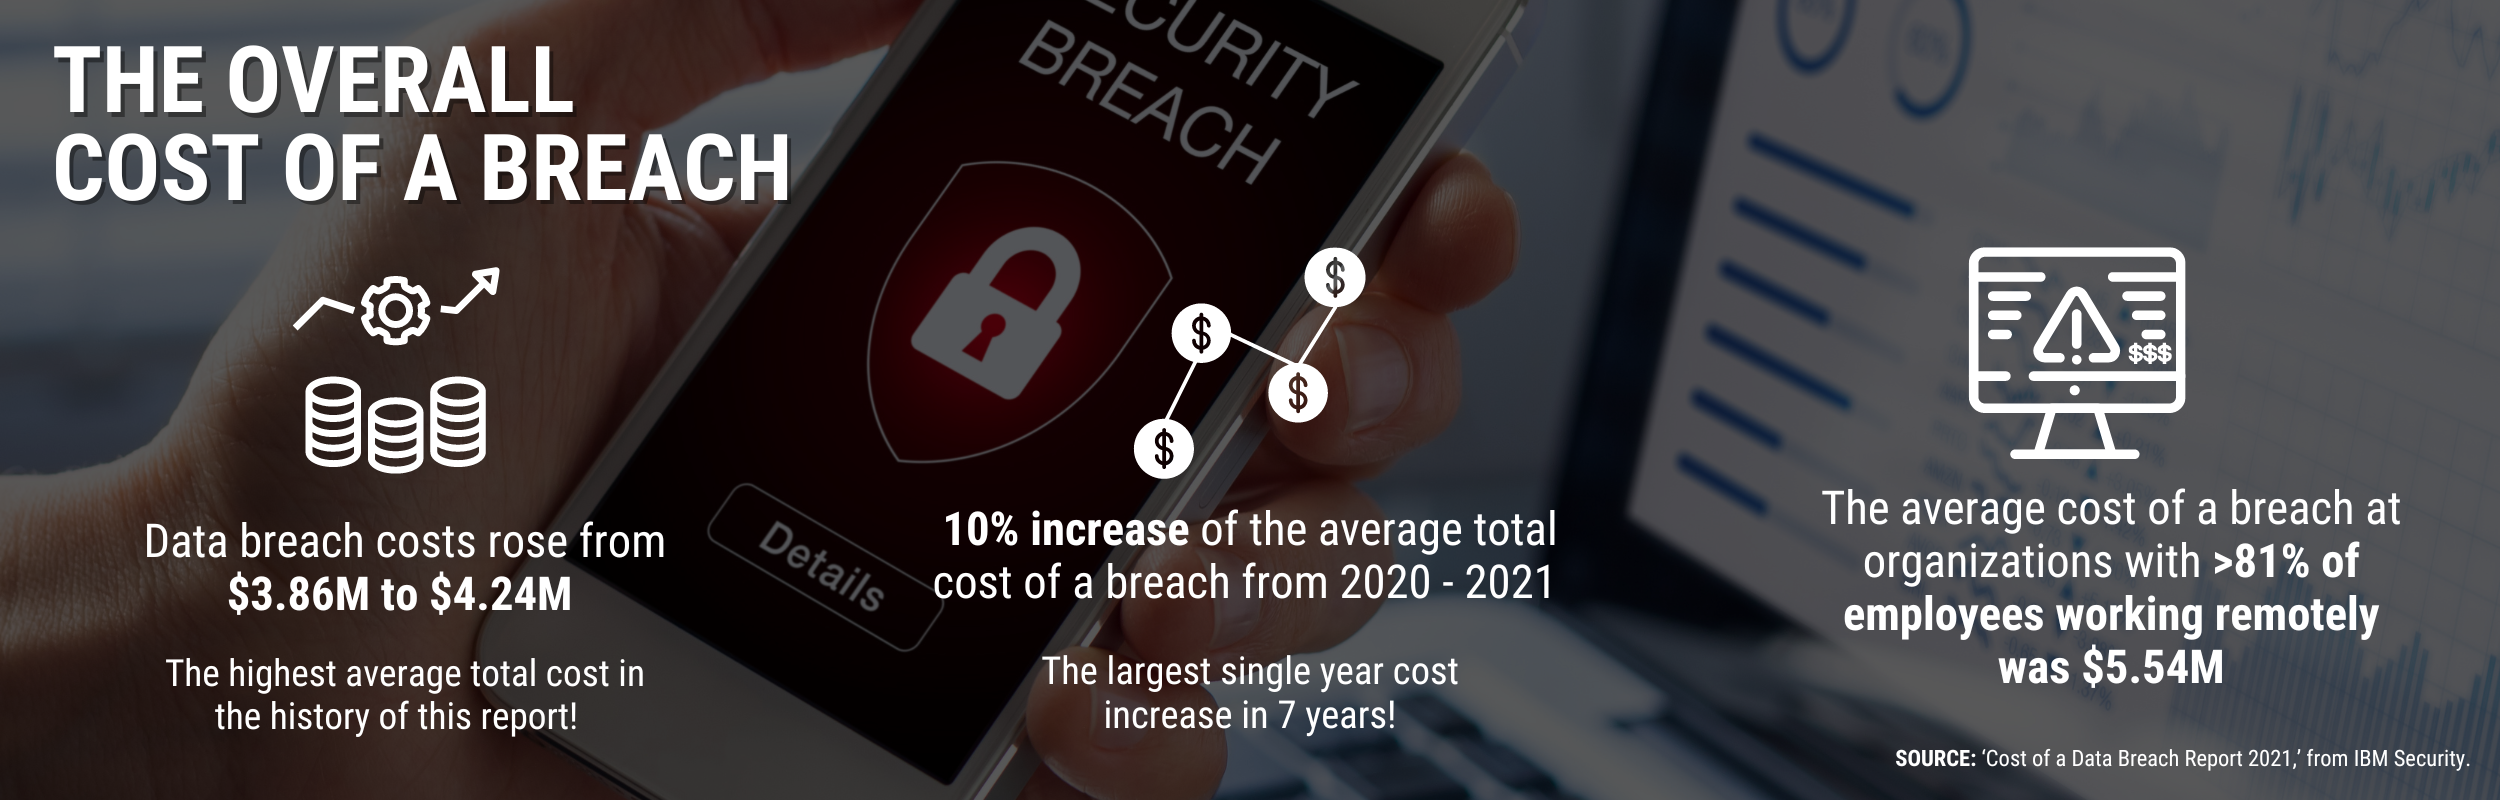 Cost of a Breach [kitoum graphic] (1)-1